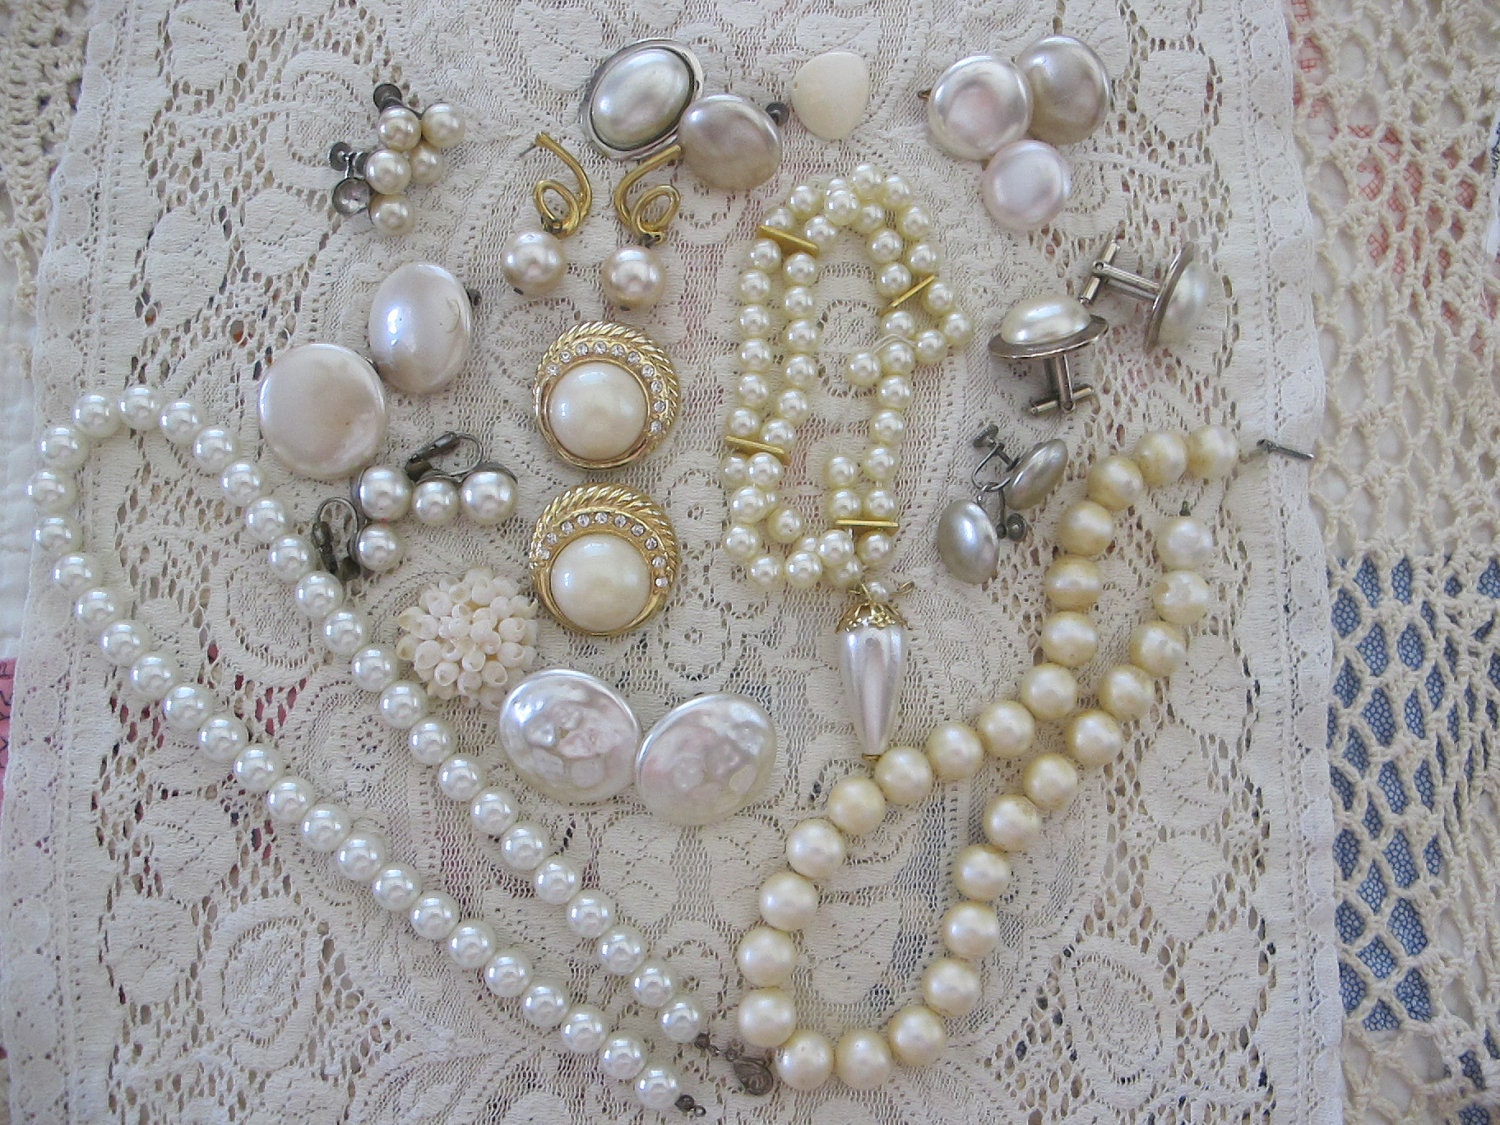 27 Pcs Vintage Jewelry Lot Destash..Creamy Pearly Bits and Pieces for Crafts..Wedding Assemblage..Mixed Media..